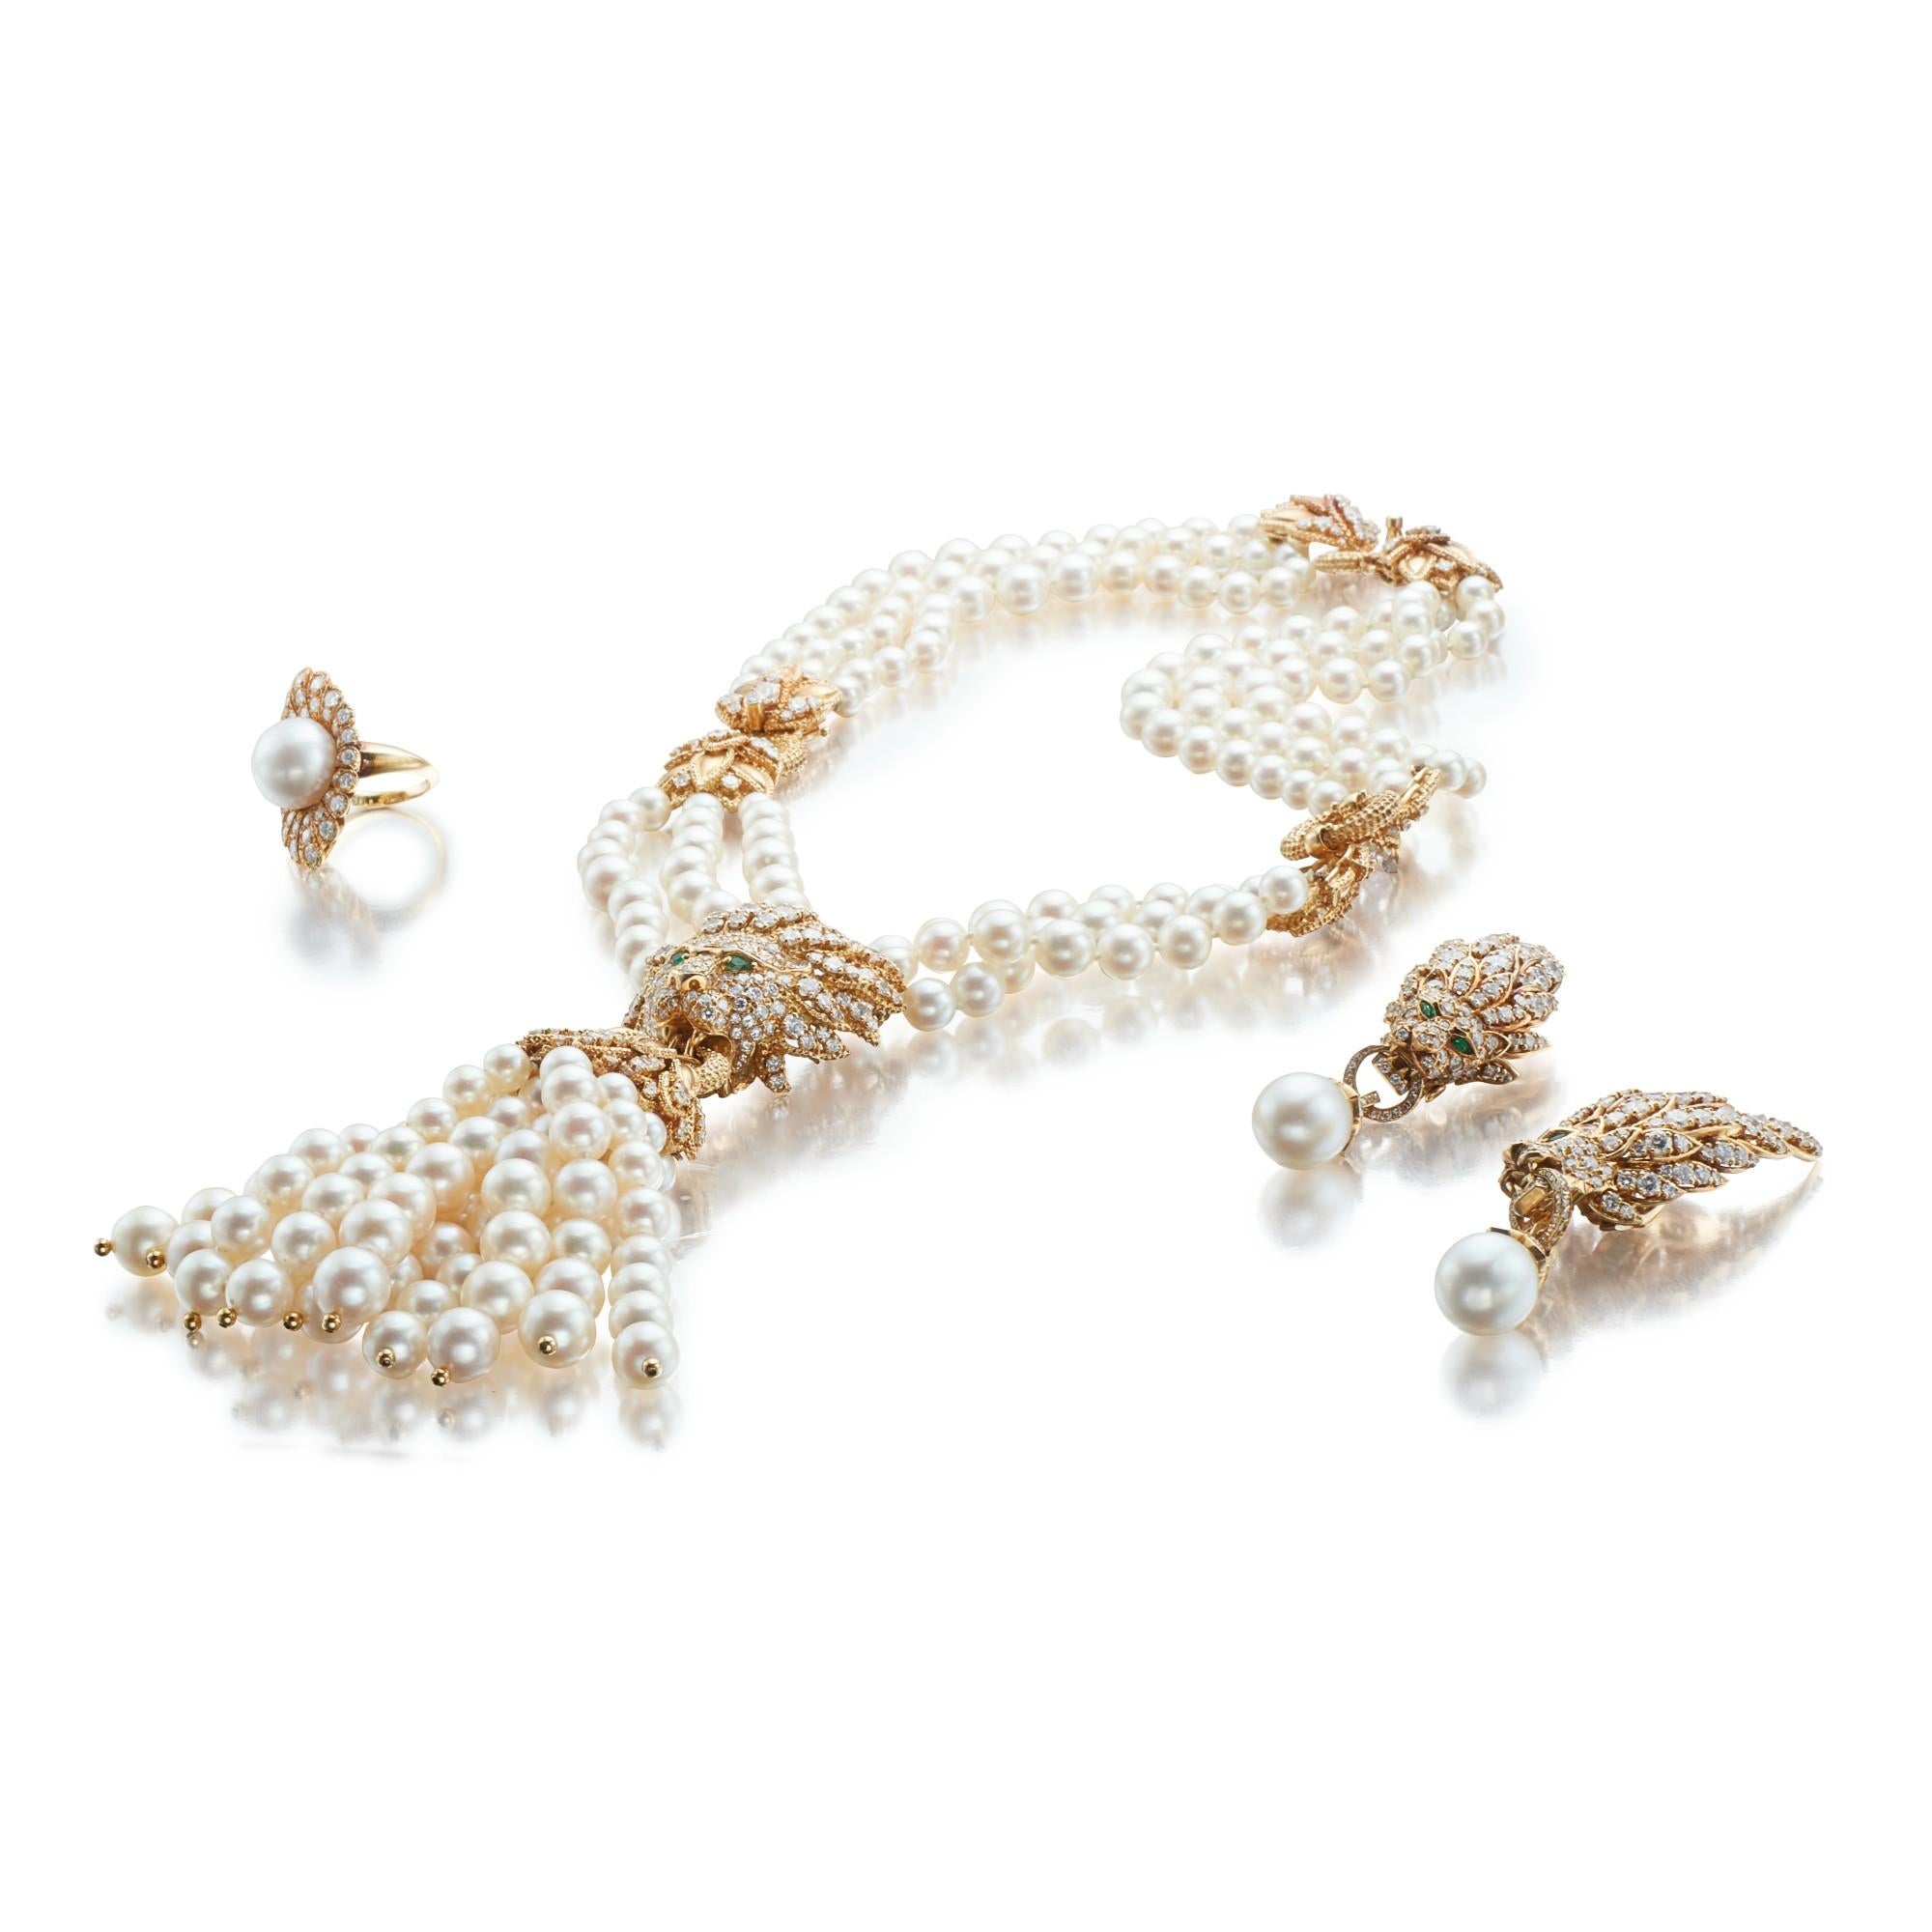 Women's or Men's Iconic Van Cleef & Arpels Pearl and Diamond Lion Necklace, Earrings and Ring Set